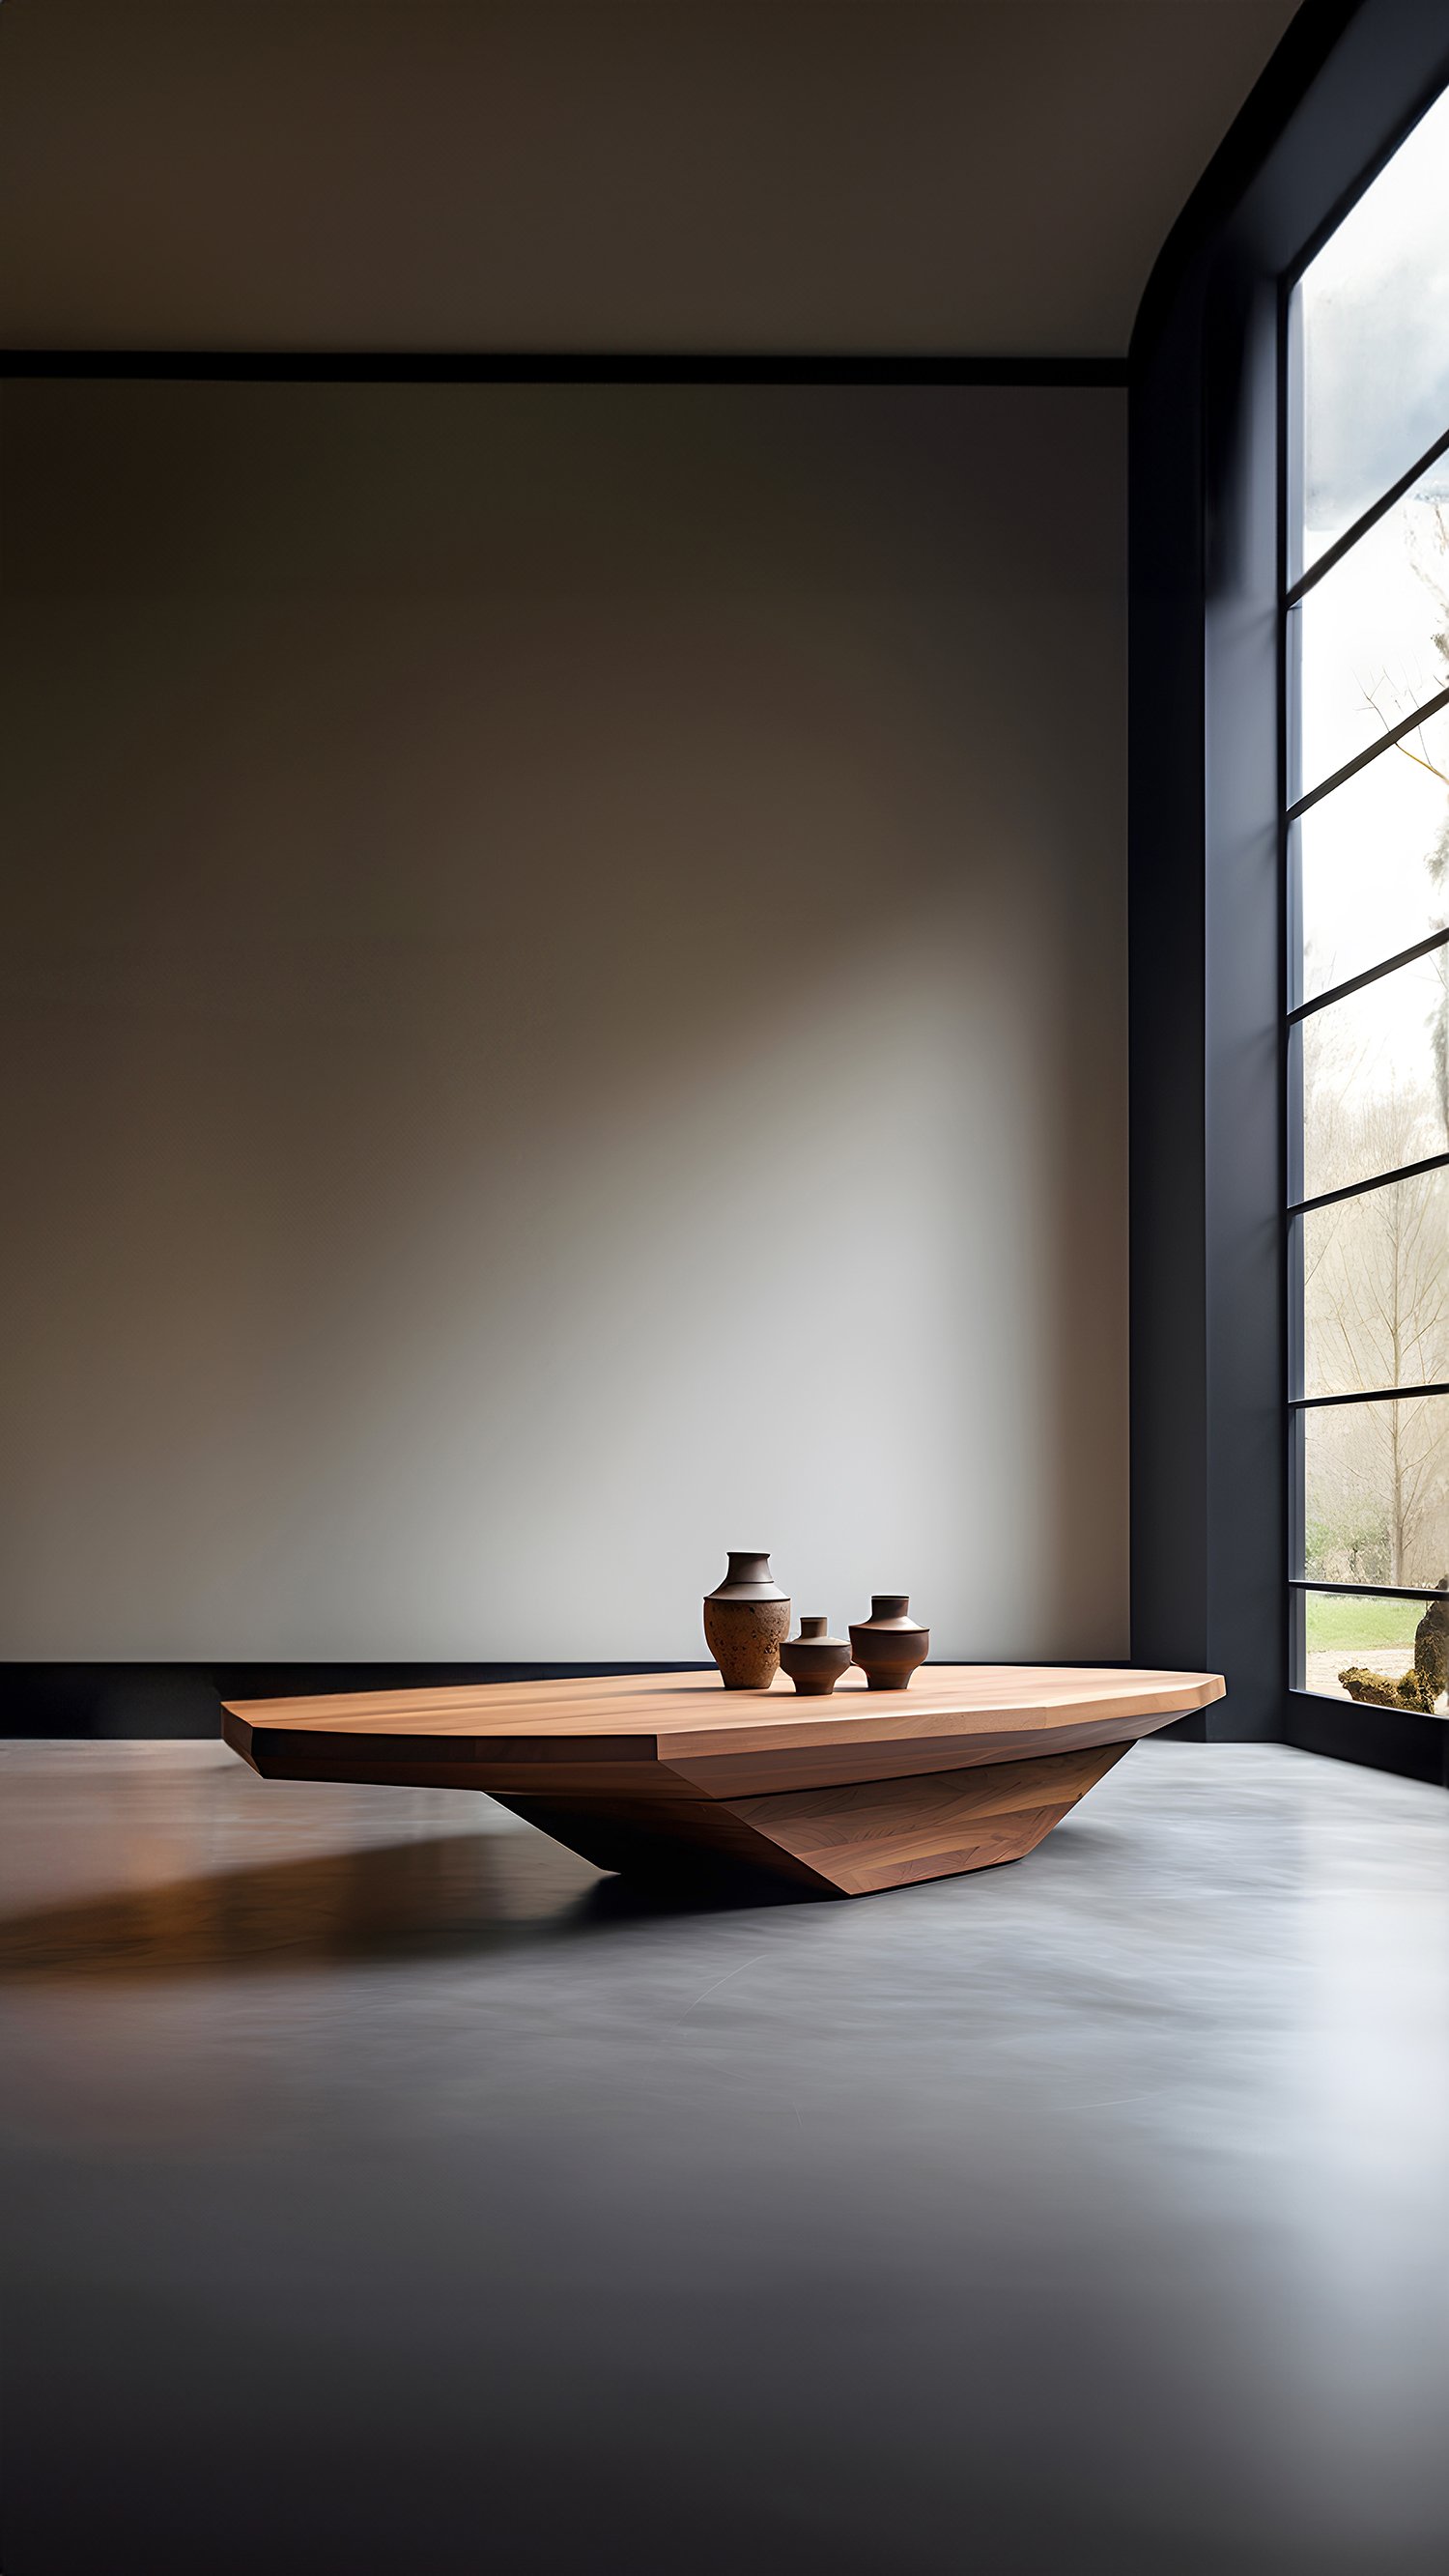 Sculptural Coffee Table Made of Solid Wood, Center Table Solace S20 by Joel Escalona — 5.jpg